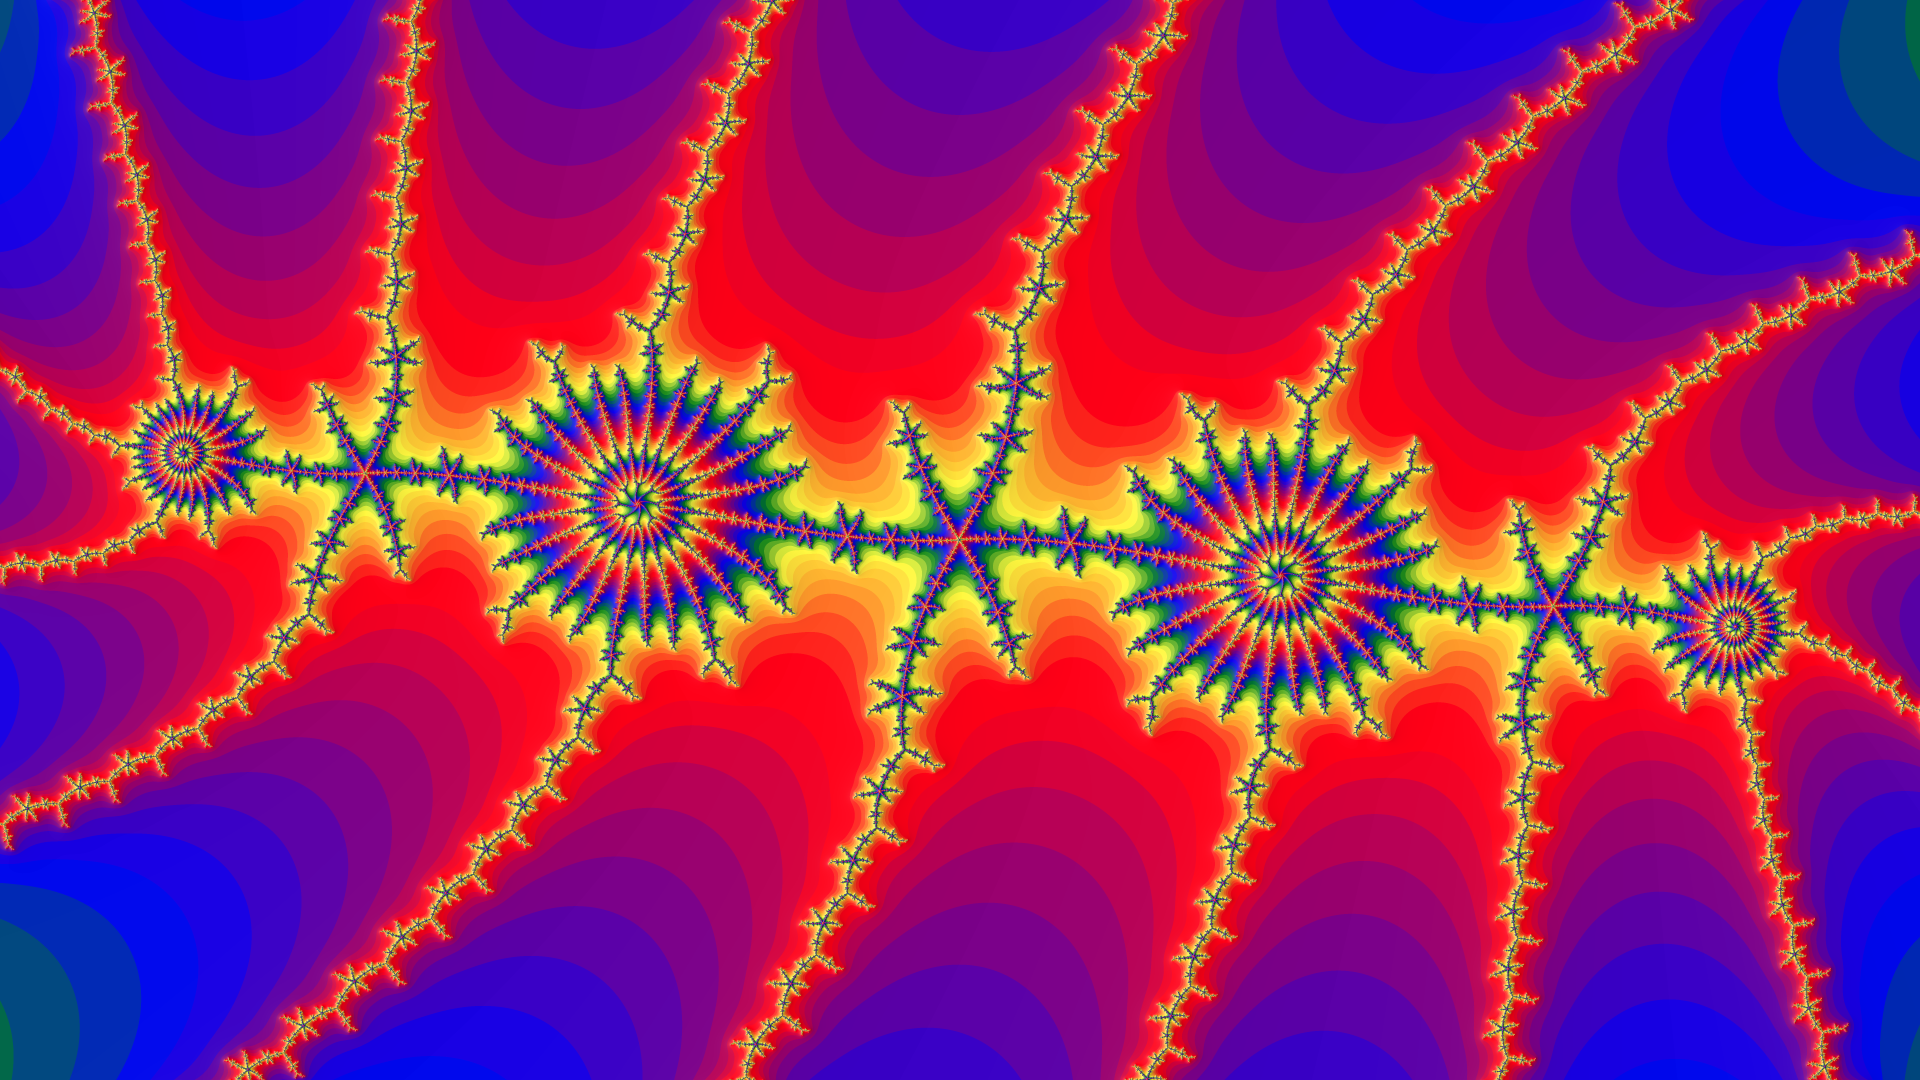 a mandelbrot fractal render with the colors of the gay pride flag